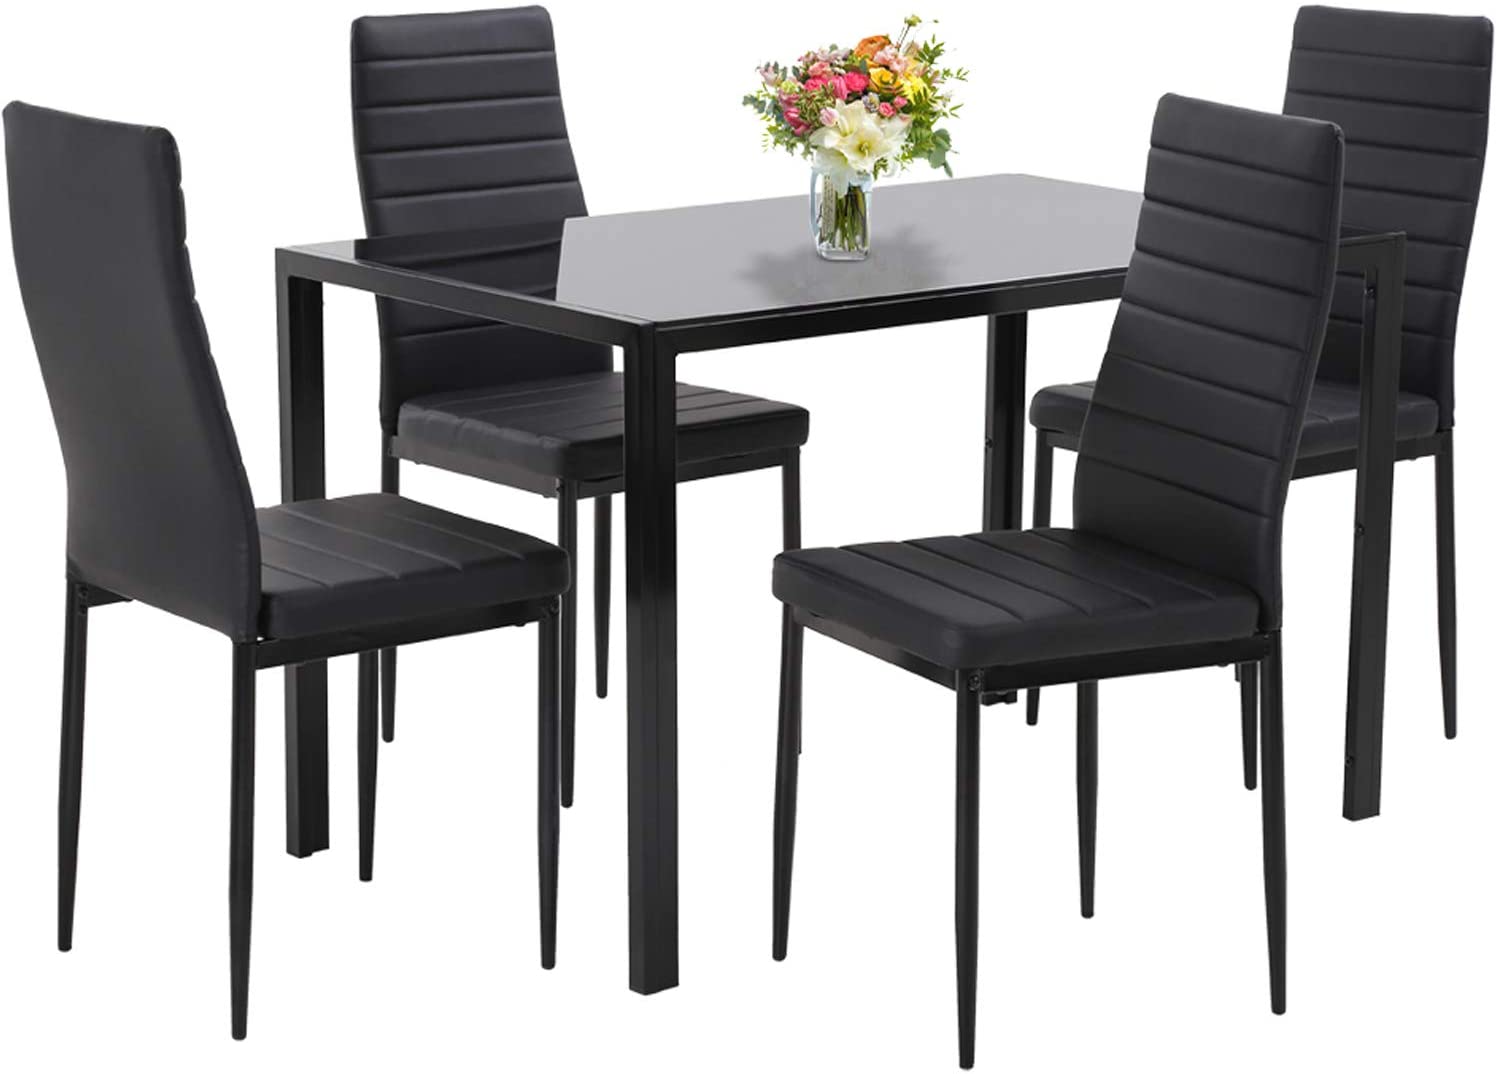 Dining Table Set 5-Piece Kitchen Dining Table Set for Dining Room, Kitchen, Compact Space w/Glass Table Top, 4 Faux Leather Metal Frame Chairs - Black